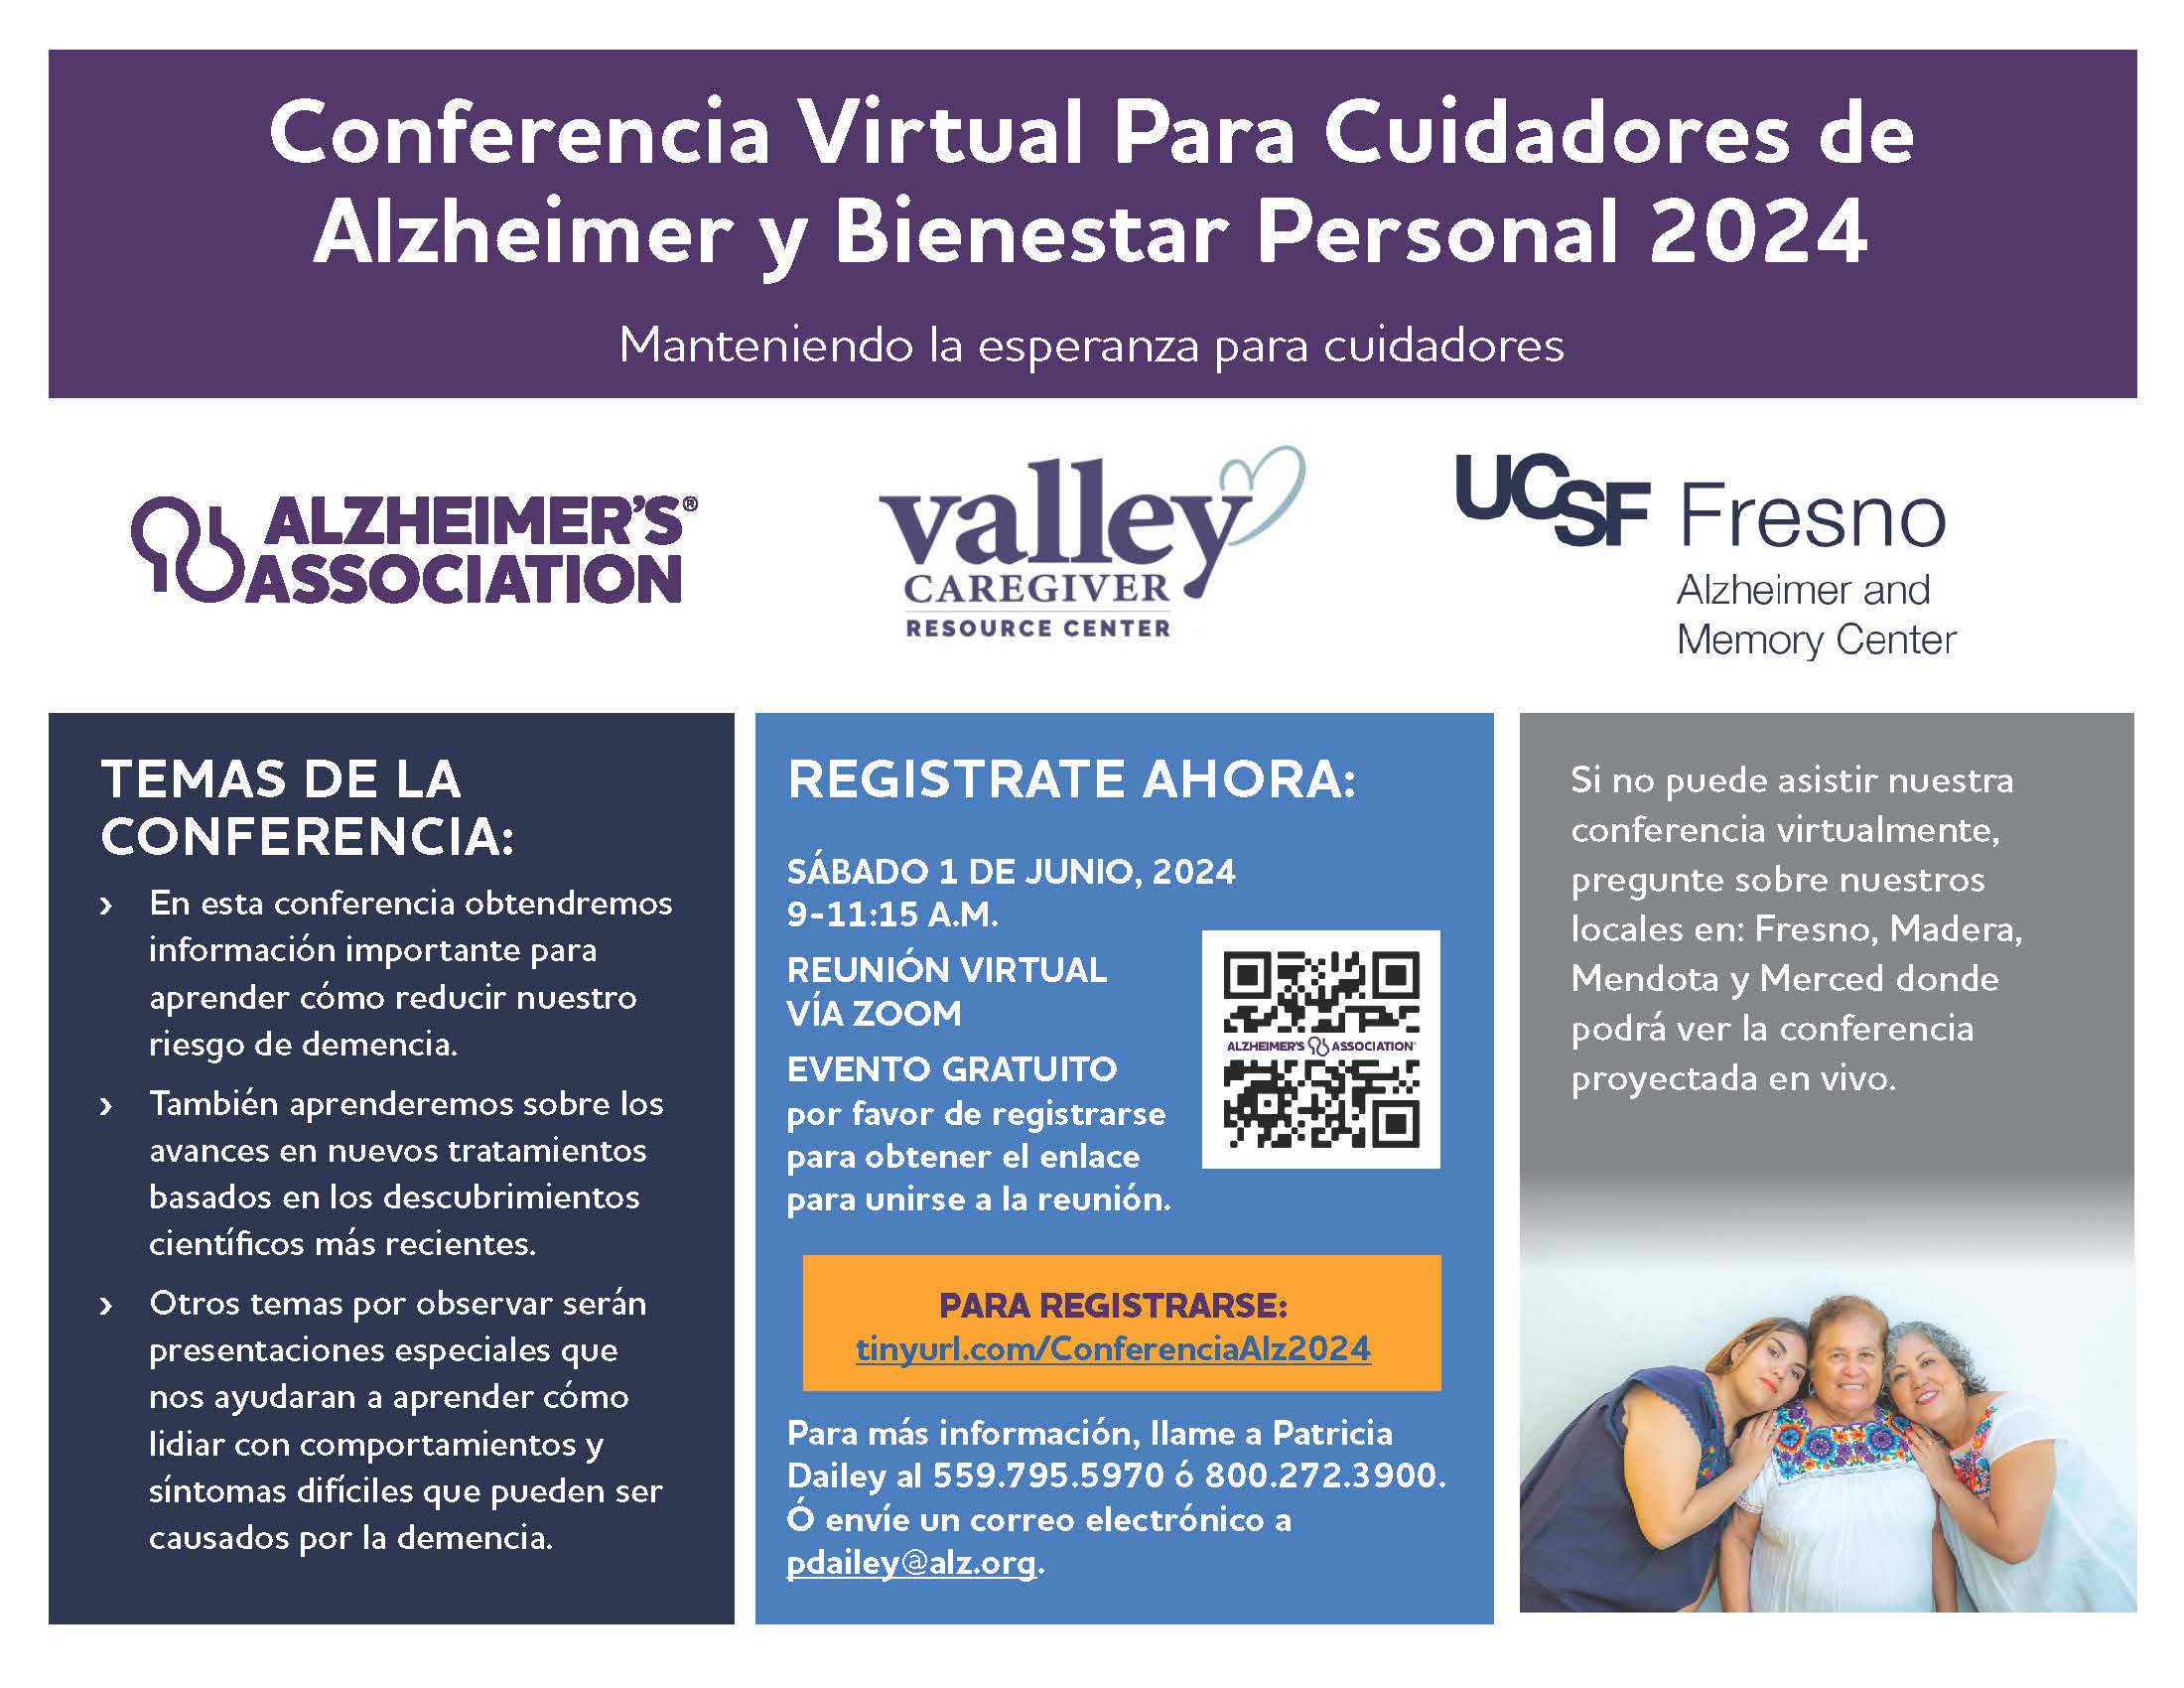 Conference Flyer in Spanish